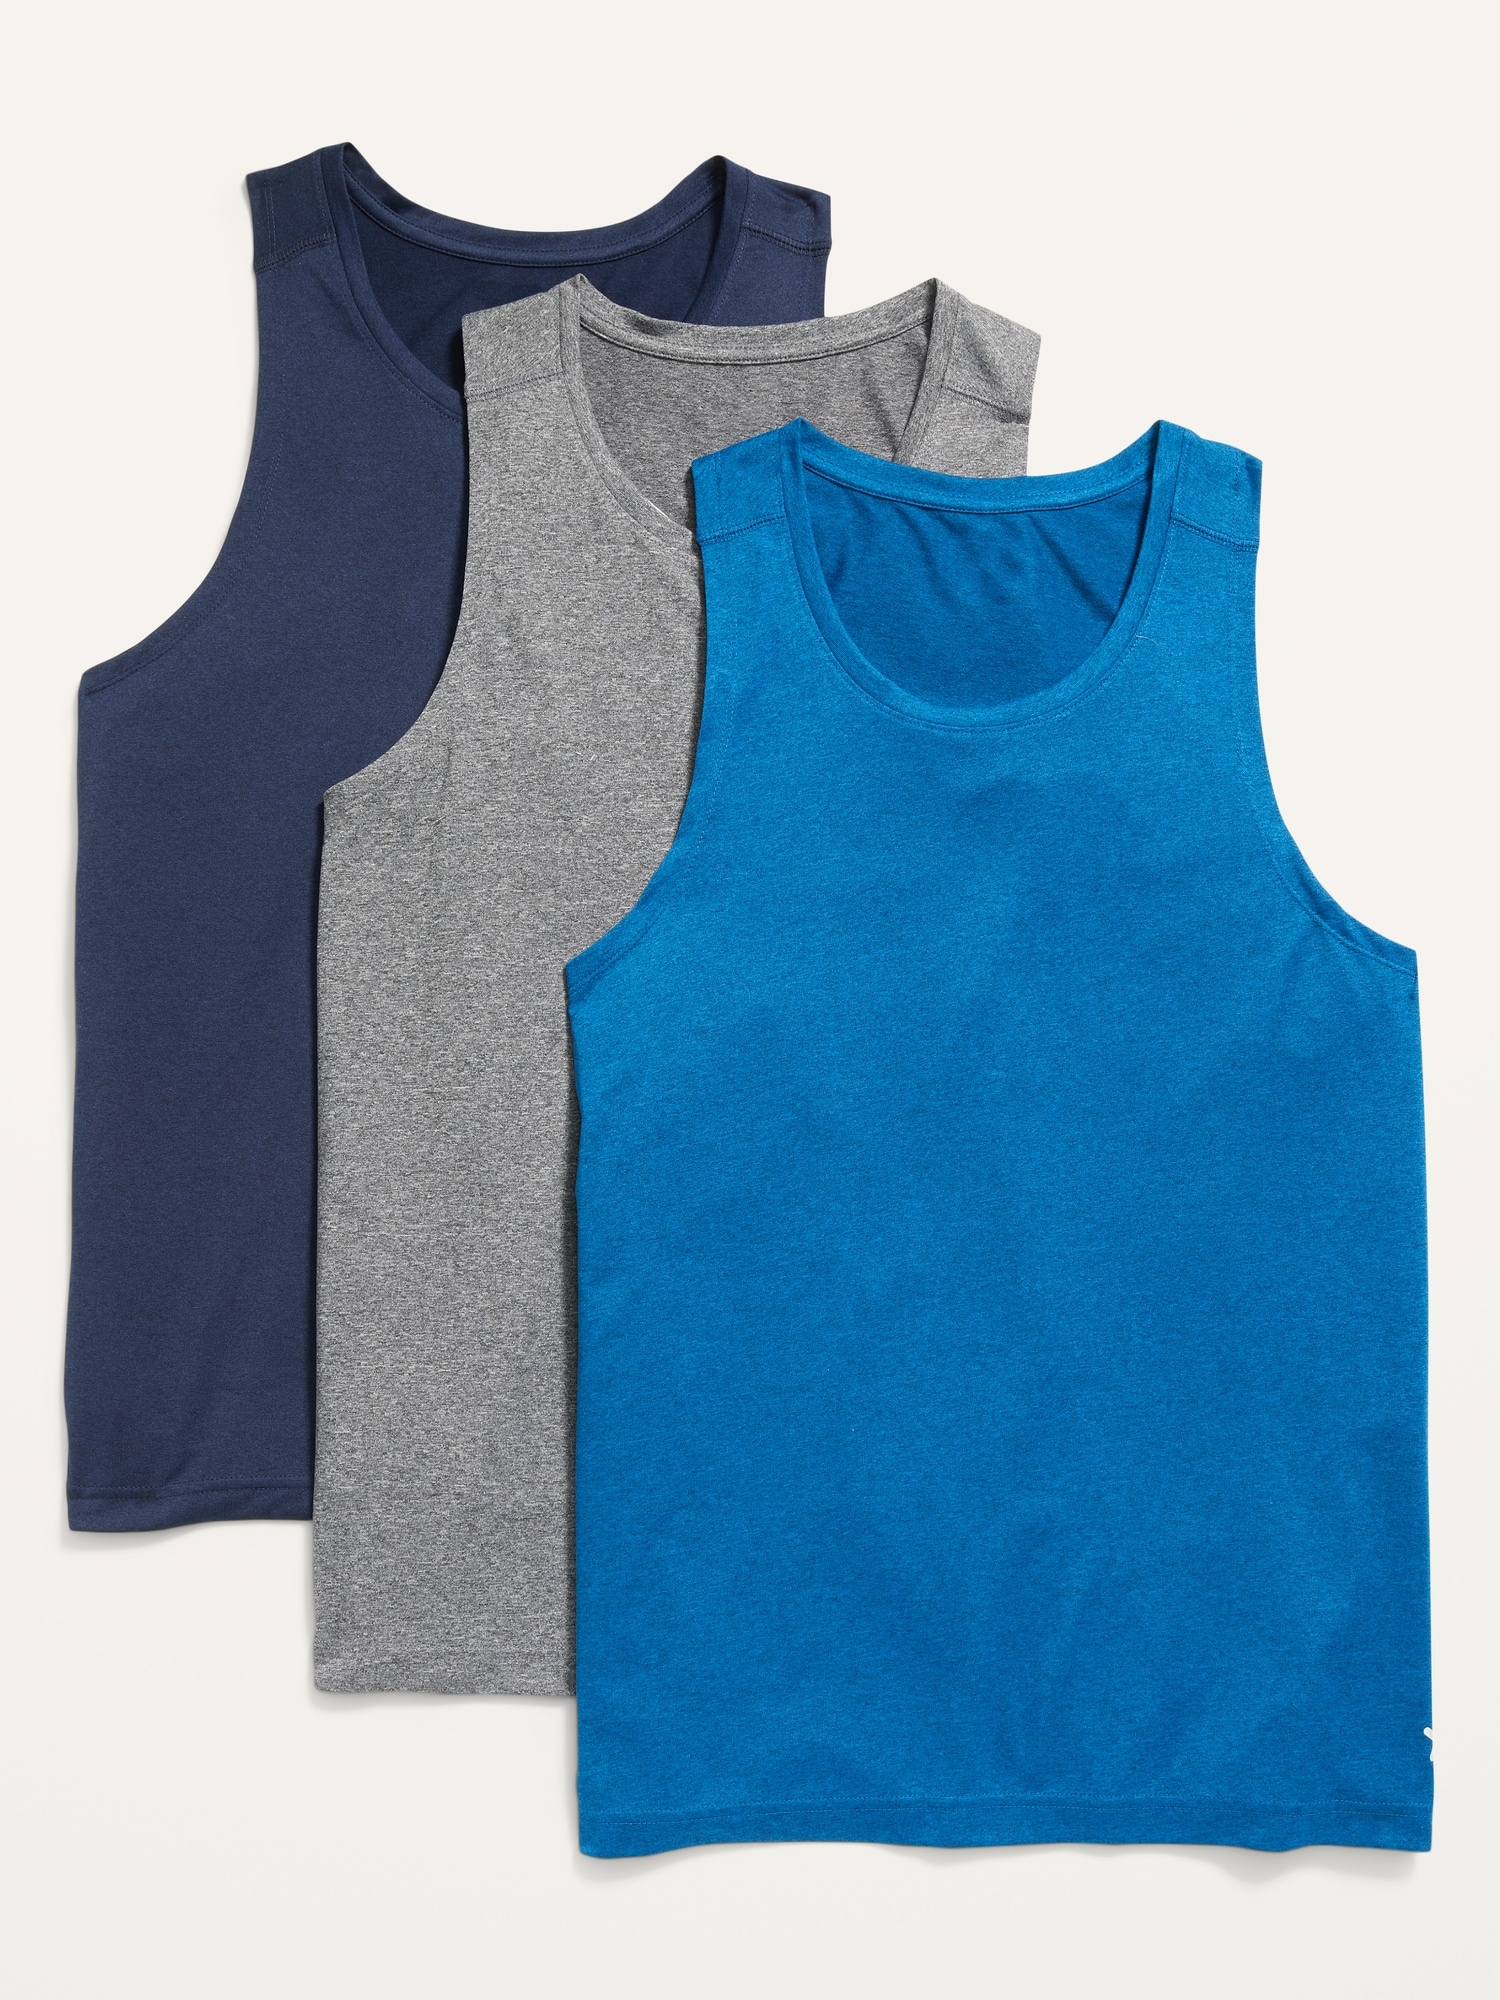 Go-Dry Cool Odor-Control Core Tank Top 3-Pack for Men On Sale At Old Navy